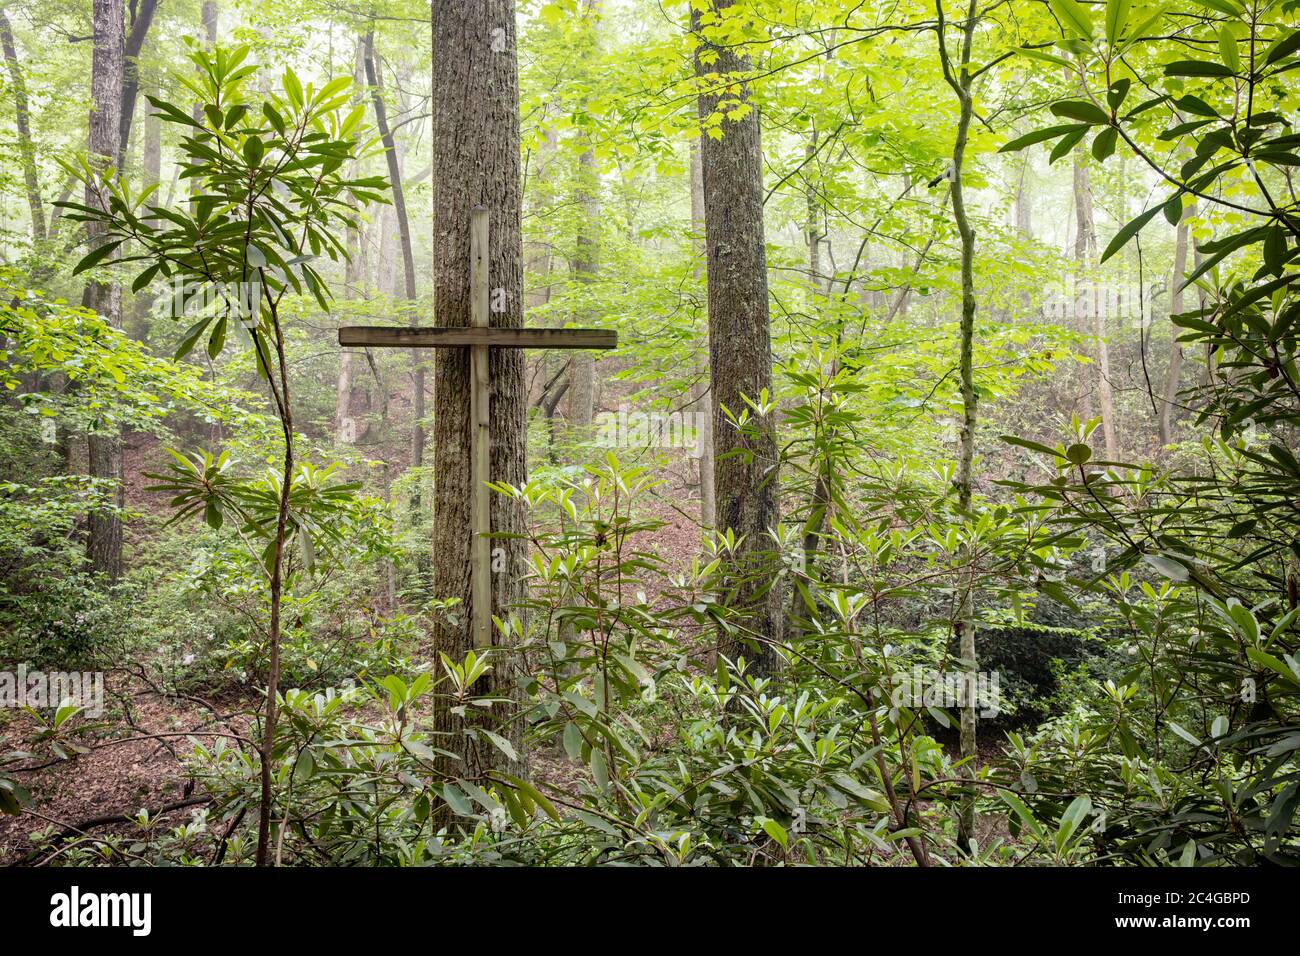 Symbolic wooden cross in the forest - Brevard, North Carolina, USA Stock Photo